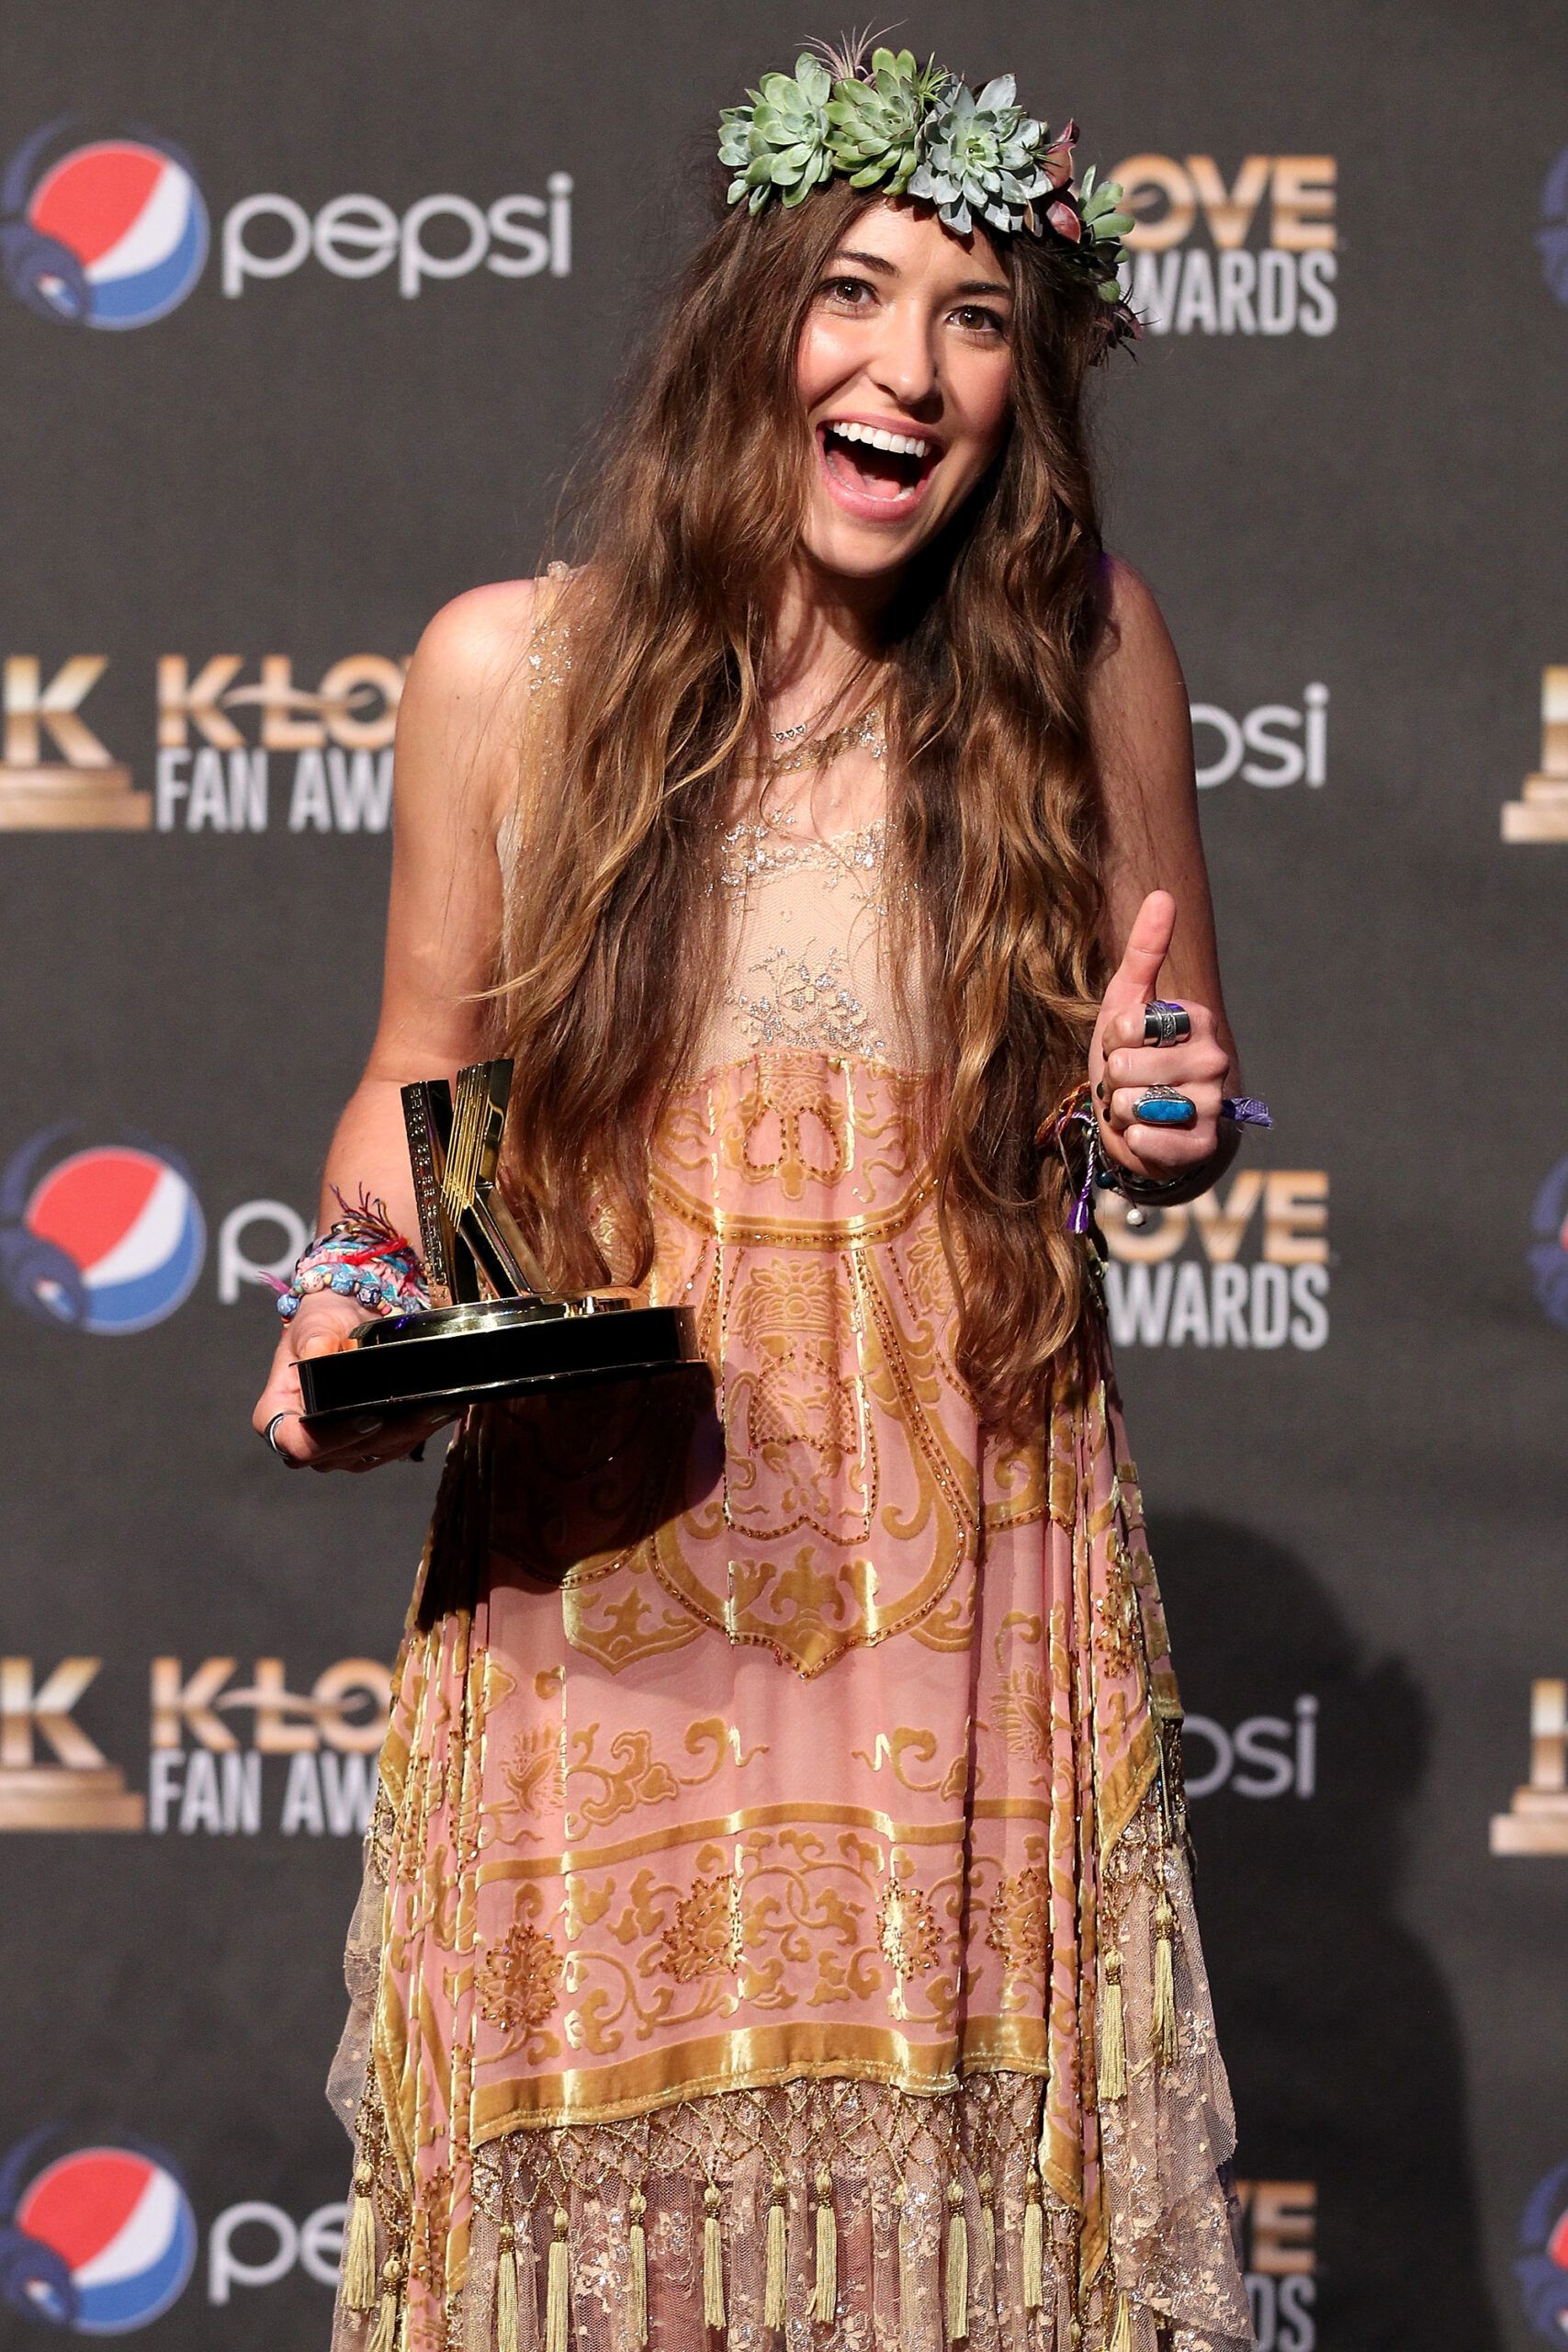 Lauren Daigle wins Worship Song of the Year at the KLOVE Fan Awards